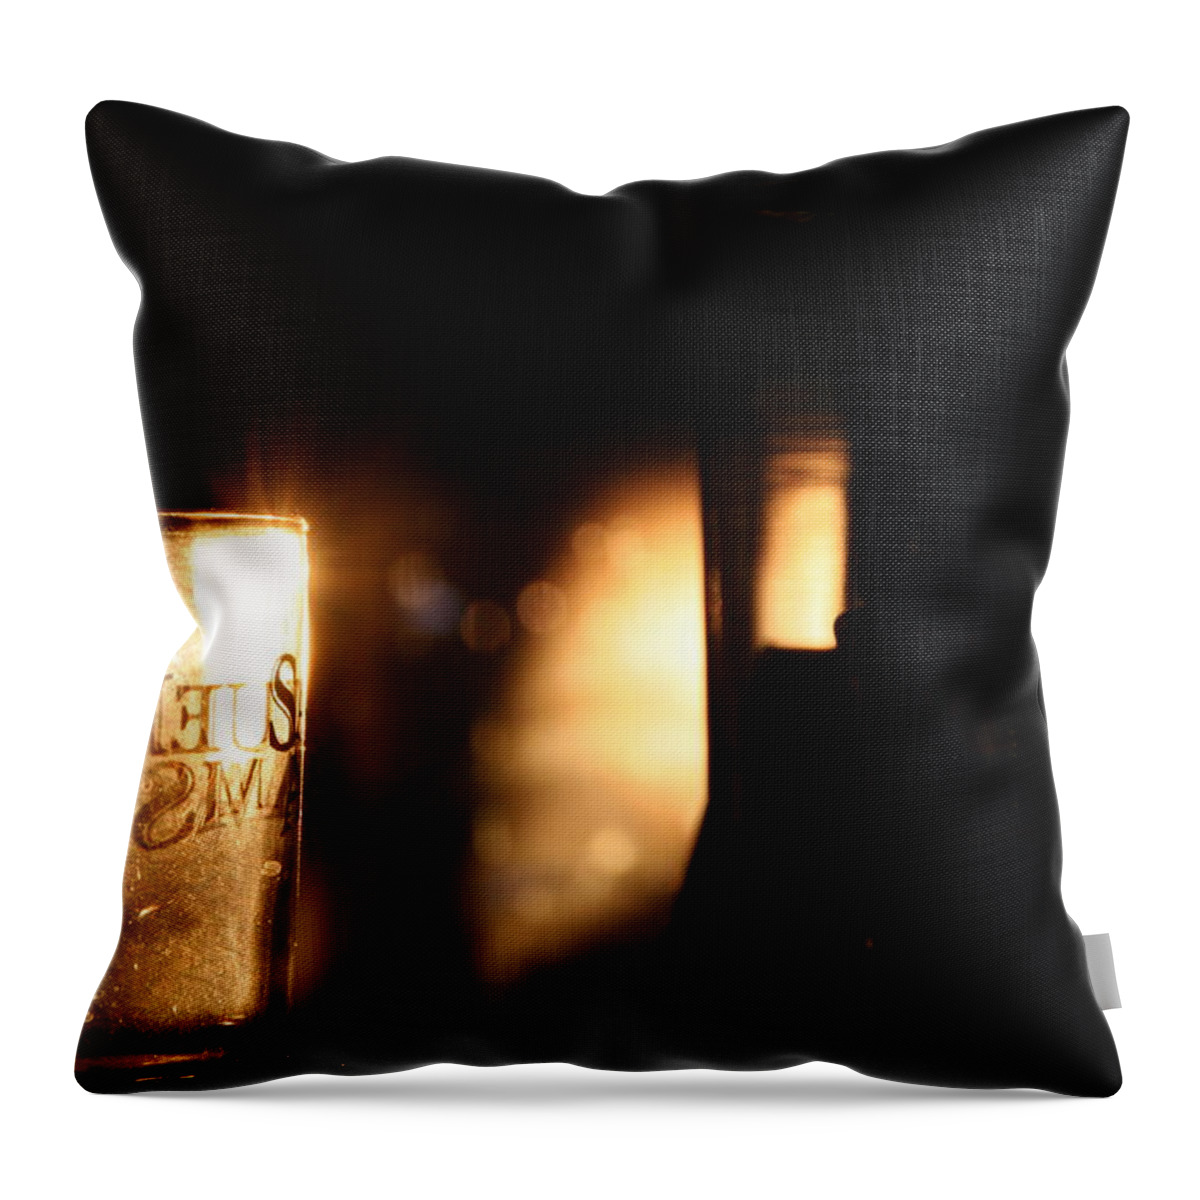 Morning Throw Pillow featuring the photograph Sam Adams by David S Reynolds